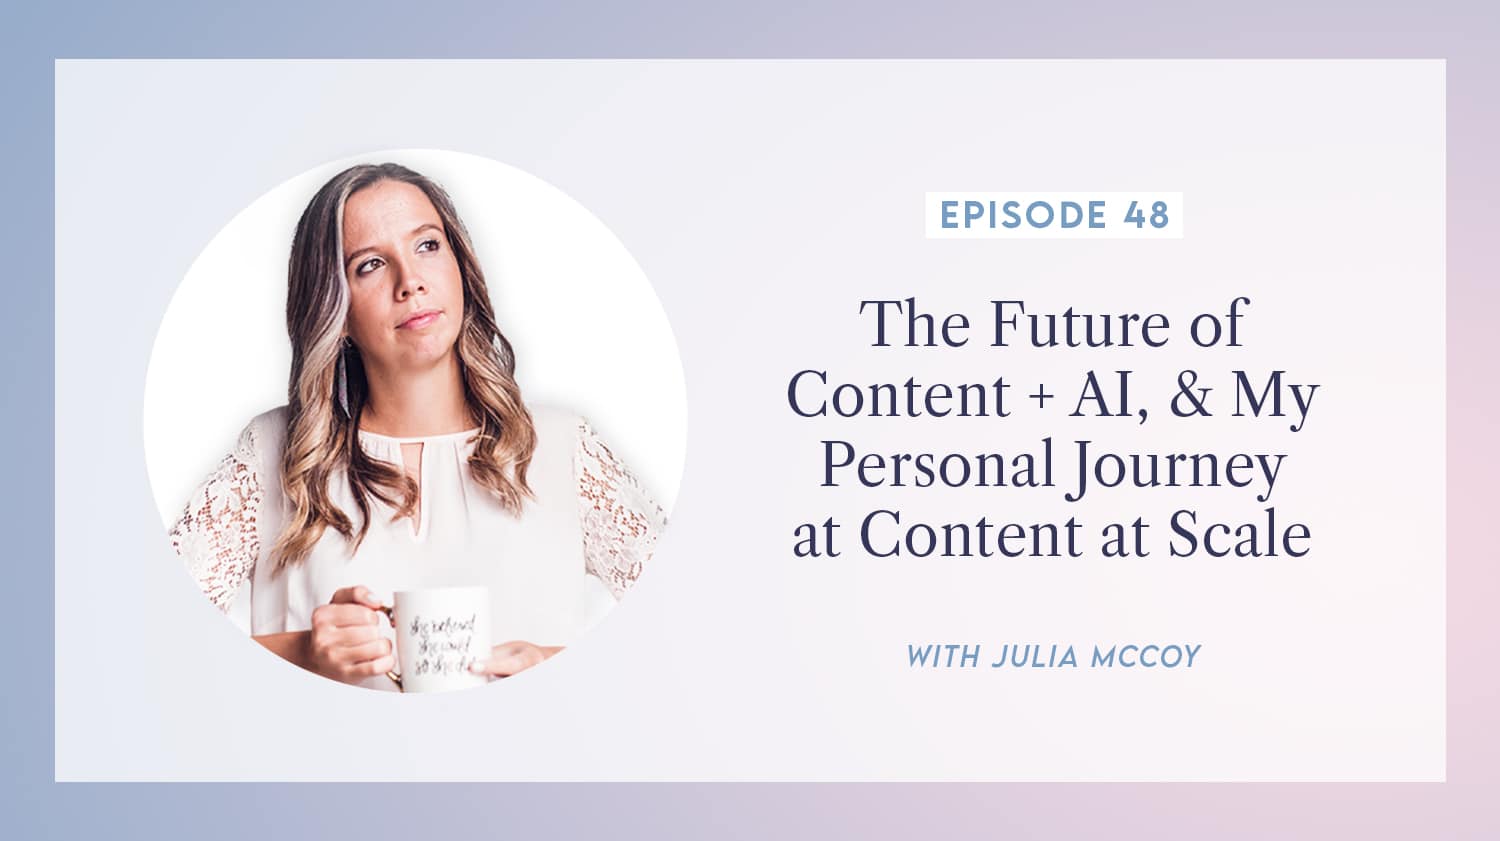 content transformation podcast with julia mccoy episode 48 the future of content + AI, & my personal journey at content at scale